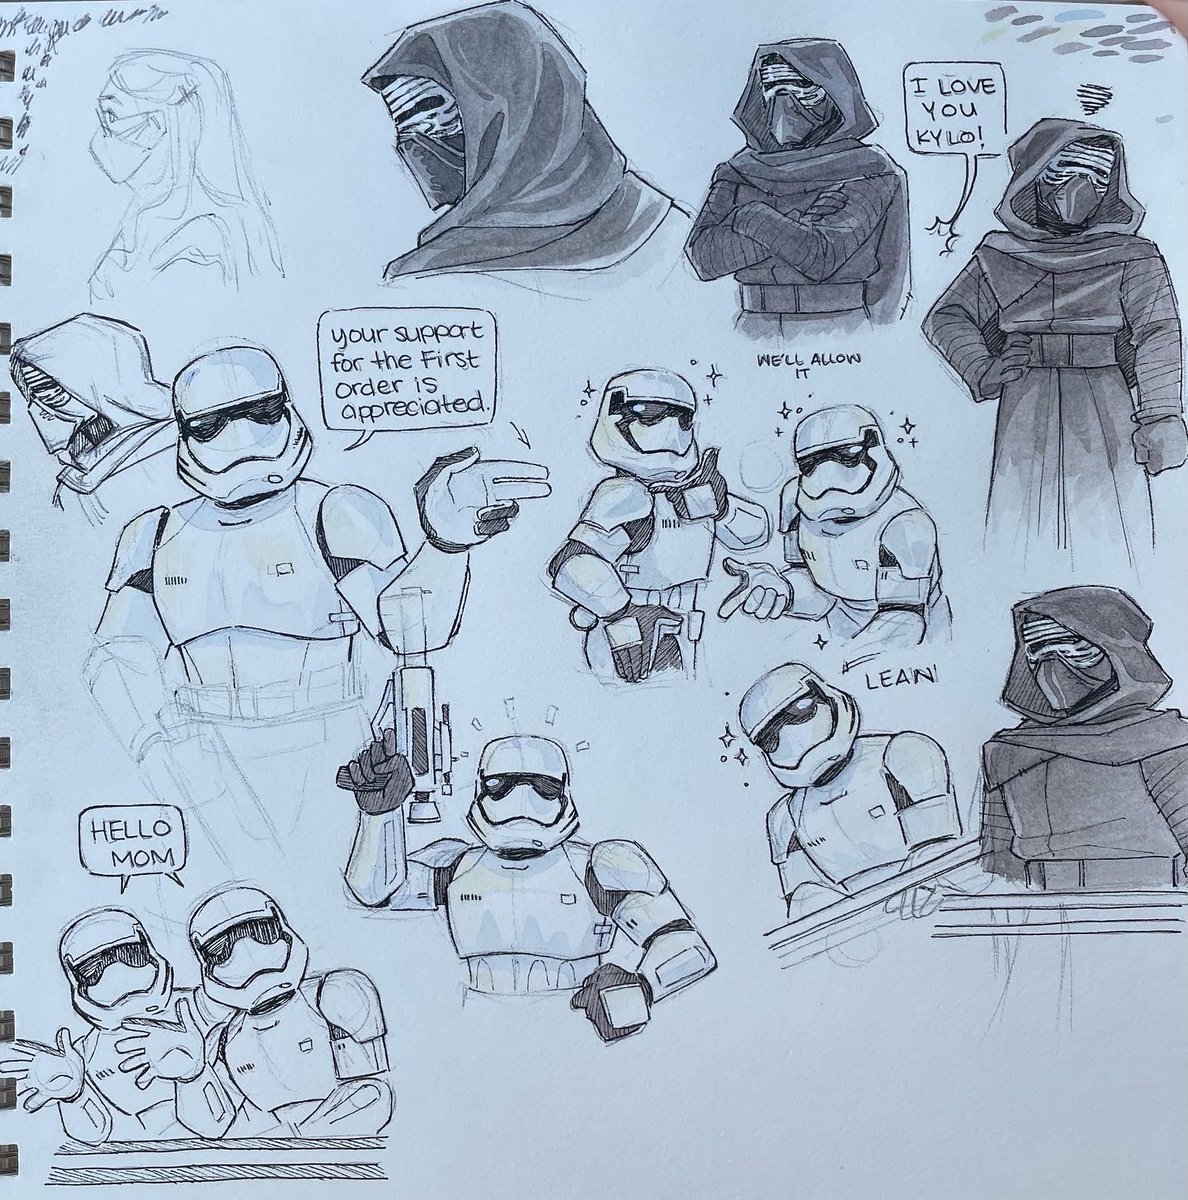 Sketches from today! My mechanical pencil broke so my sketches were done in pen. Rather messy but not bad in a pinch.

As always the troopers were joy and even said hello to my mom when she called me. Cant wait for the days to get longer and warmer so I can stay longer. 